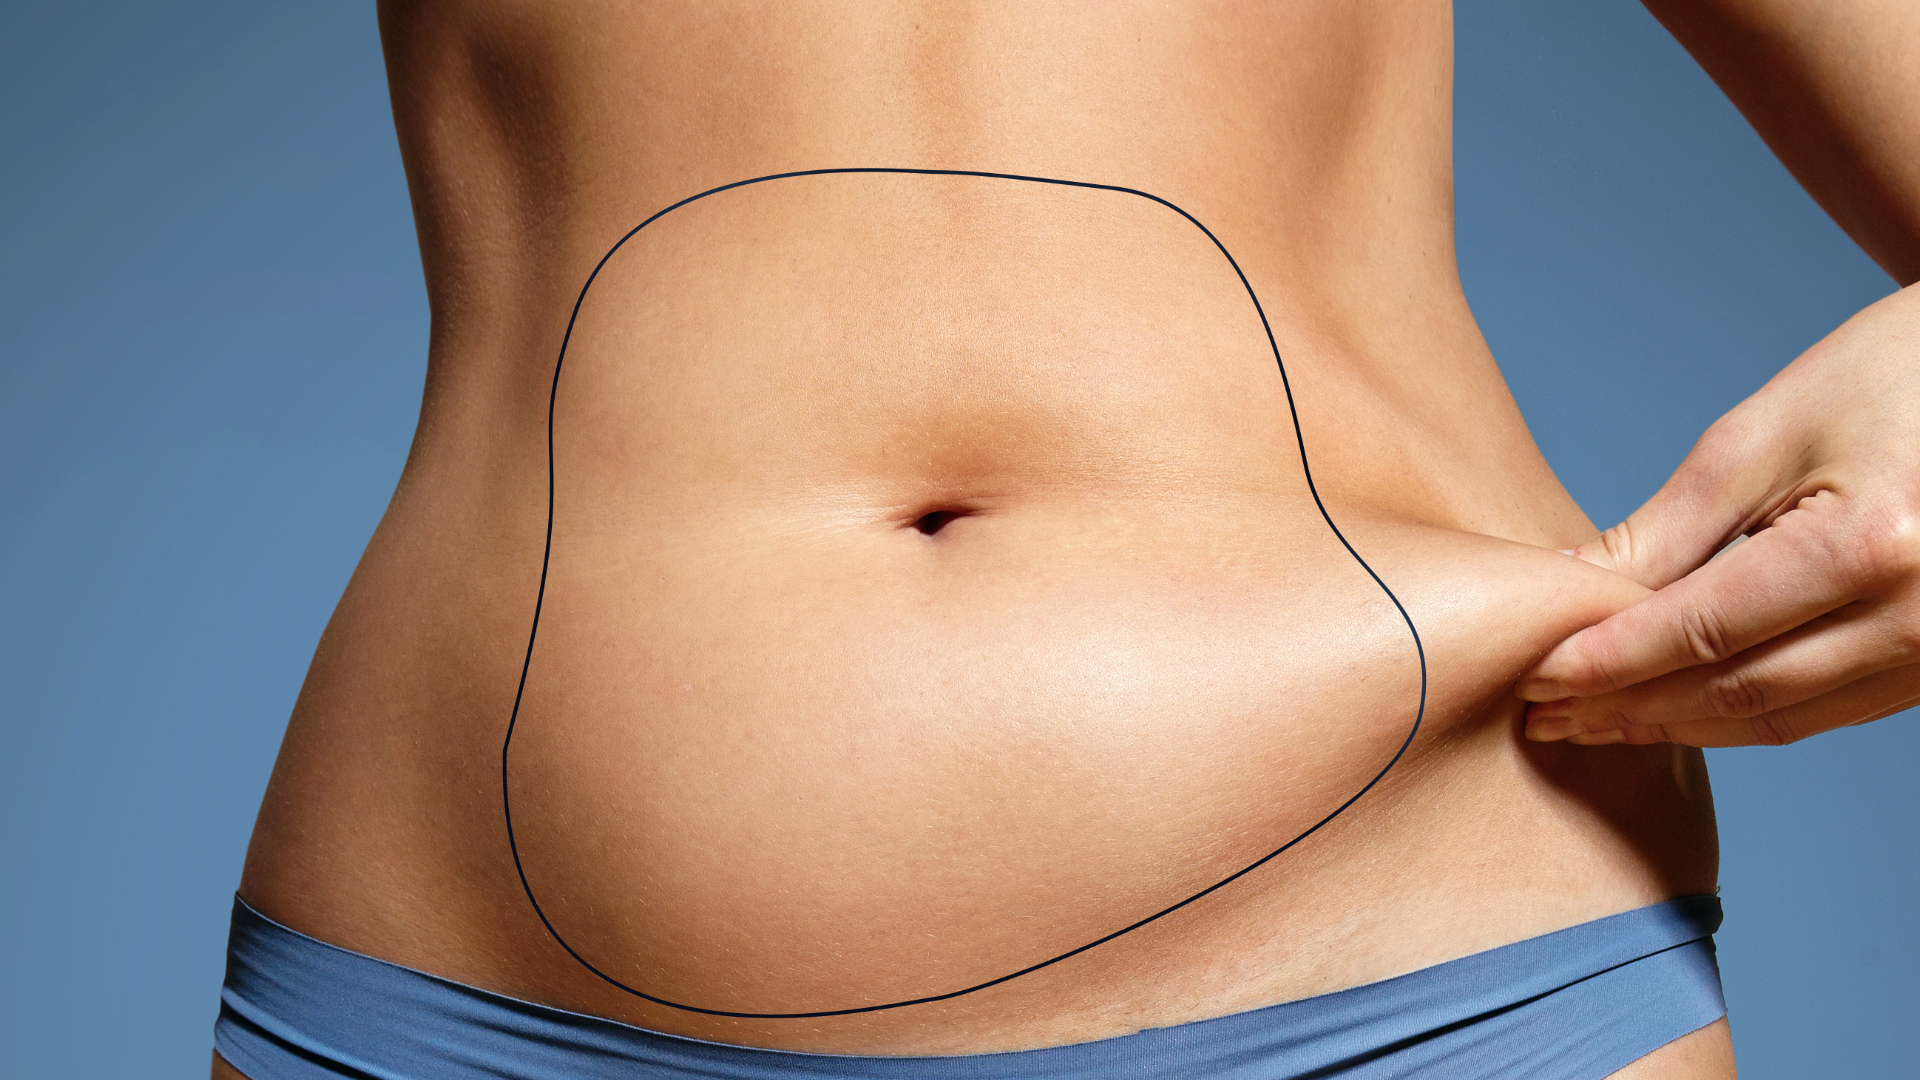 Liposuction vs Weight Loss Surgery: What Should You Choose?